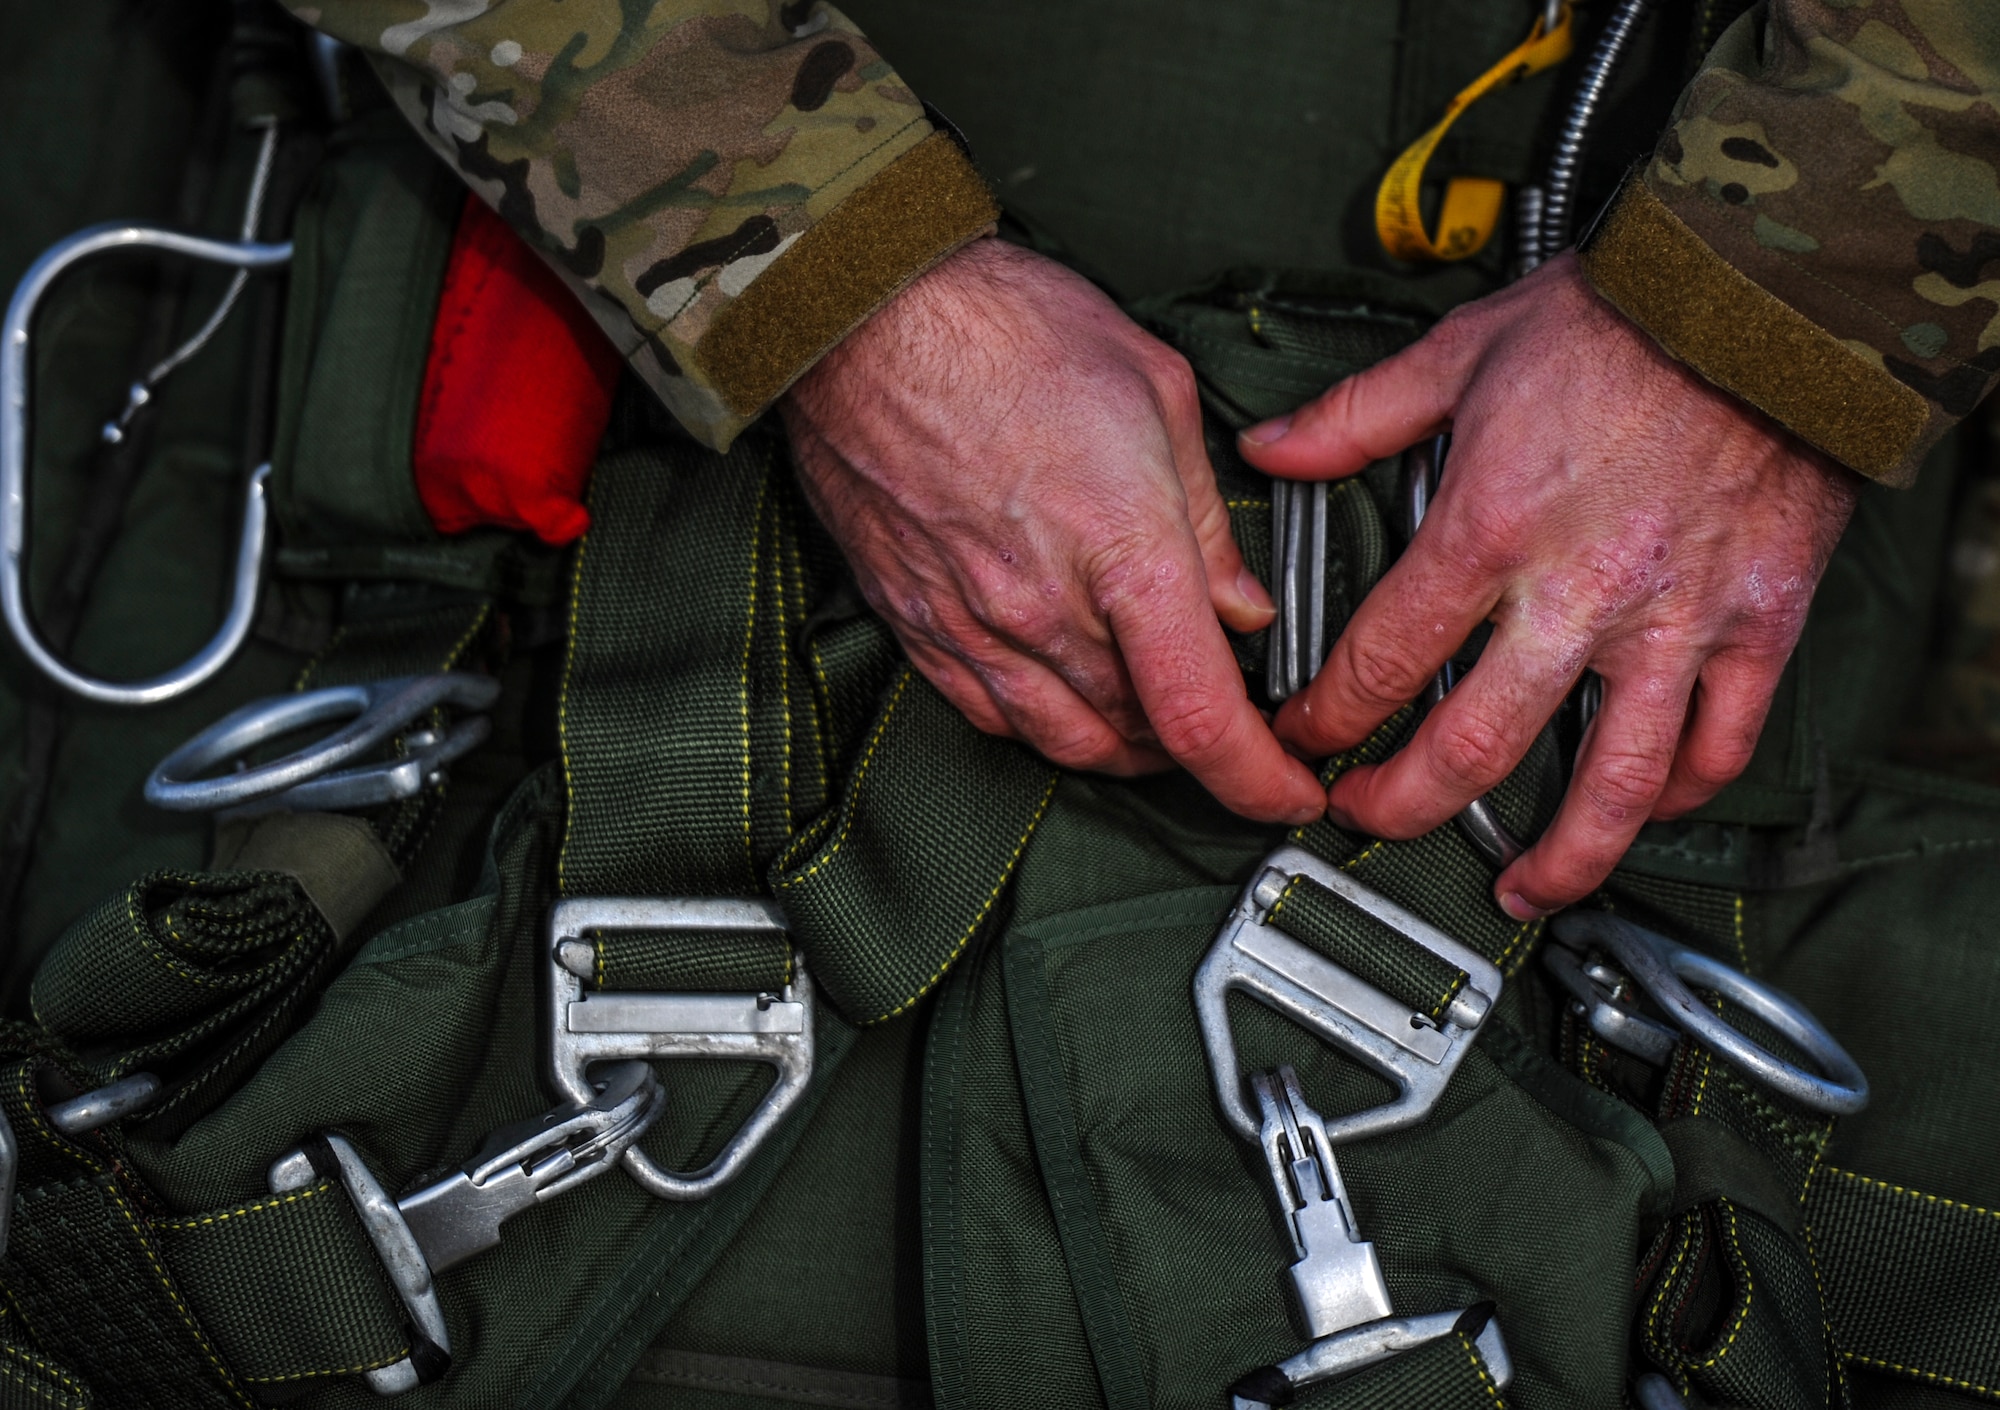 A Special Tactics Airman from the 24th Special Operations Wing prepares for a high-altitude low-opening jump from an MC-130H Talon II at Hurlburt Field, Fla., Jan. 7, 2014. The 24th SOW’s mission is to provide Special Tactics forces for rapid global employment to enable airpower success. (U.S. Air Force photo/Senior Airman Christopher Callaway)